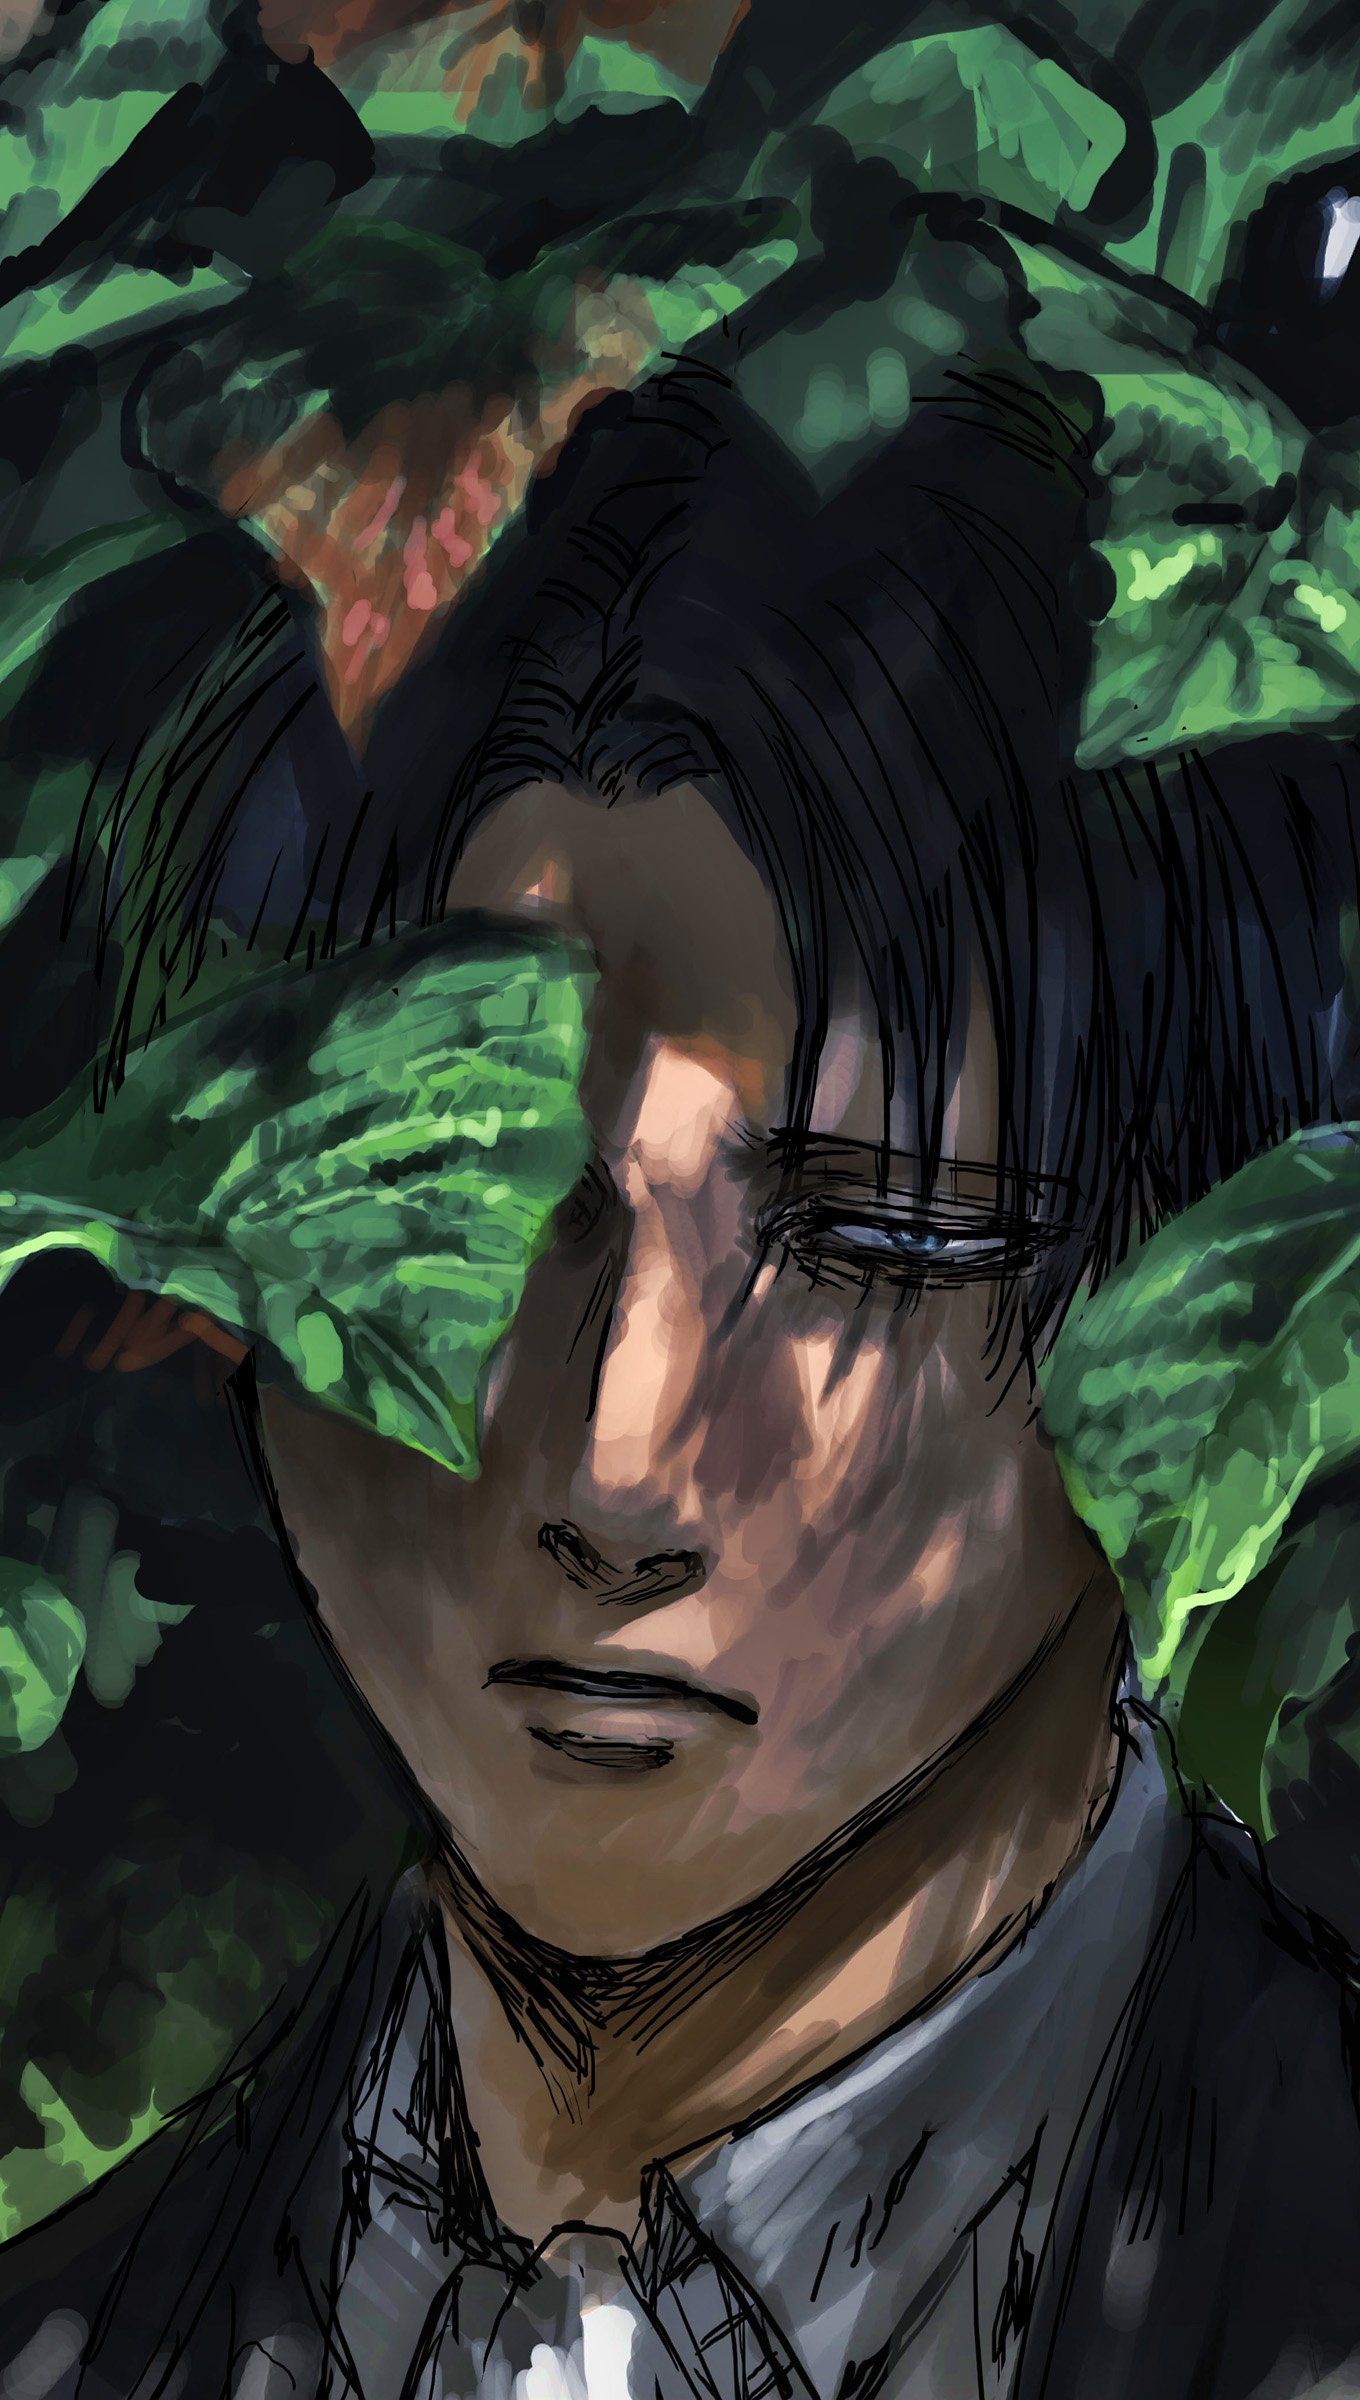 Levi Ackerman Wallpaper Phone If You Re Looking For The Best Levi